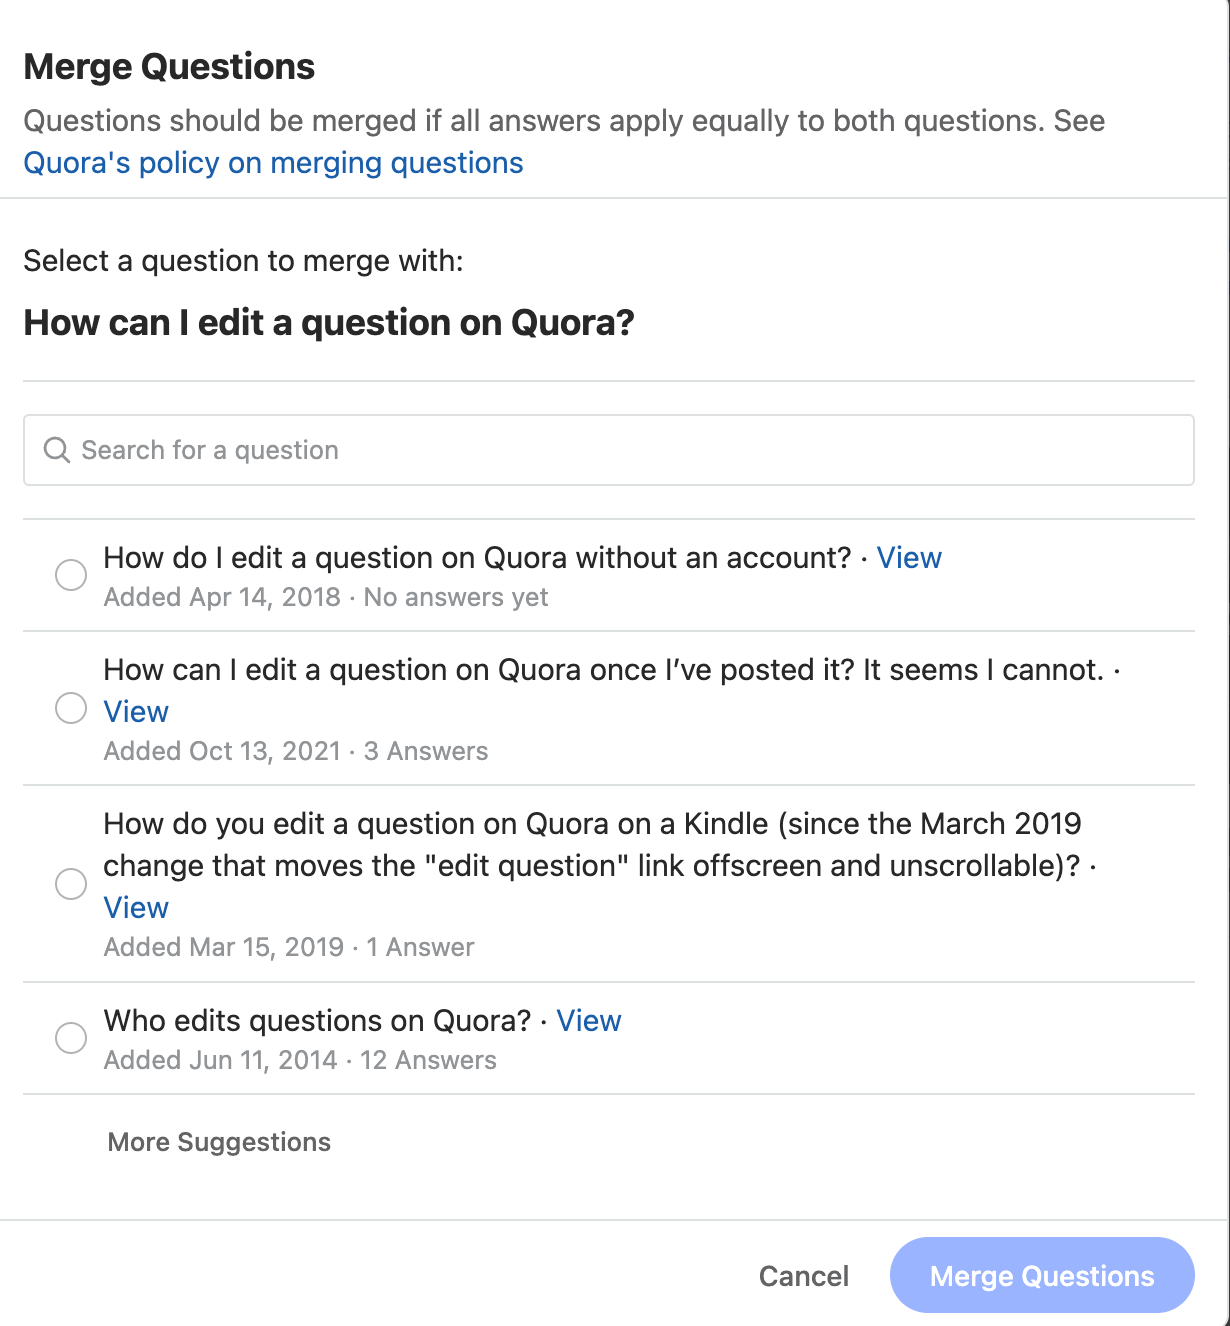 The merge questions popup. Suggested questions are "How do I edit a question on Quora without an account?", "How can I edit a question on Quora once I've posted it?", "How can you edit a question on Quora on a Kindle?" and "Who edits questions on Quora?"